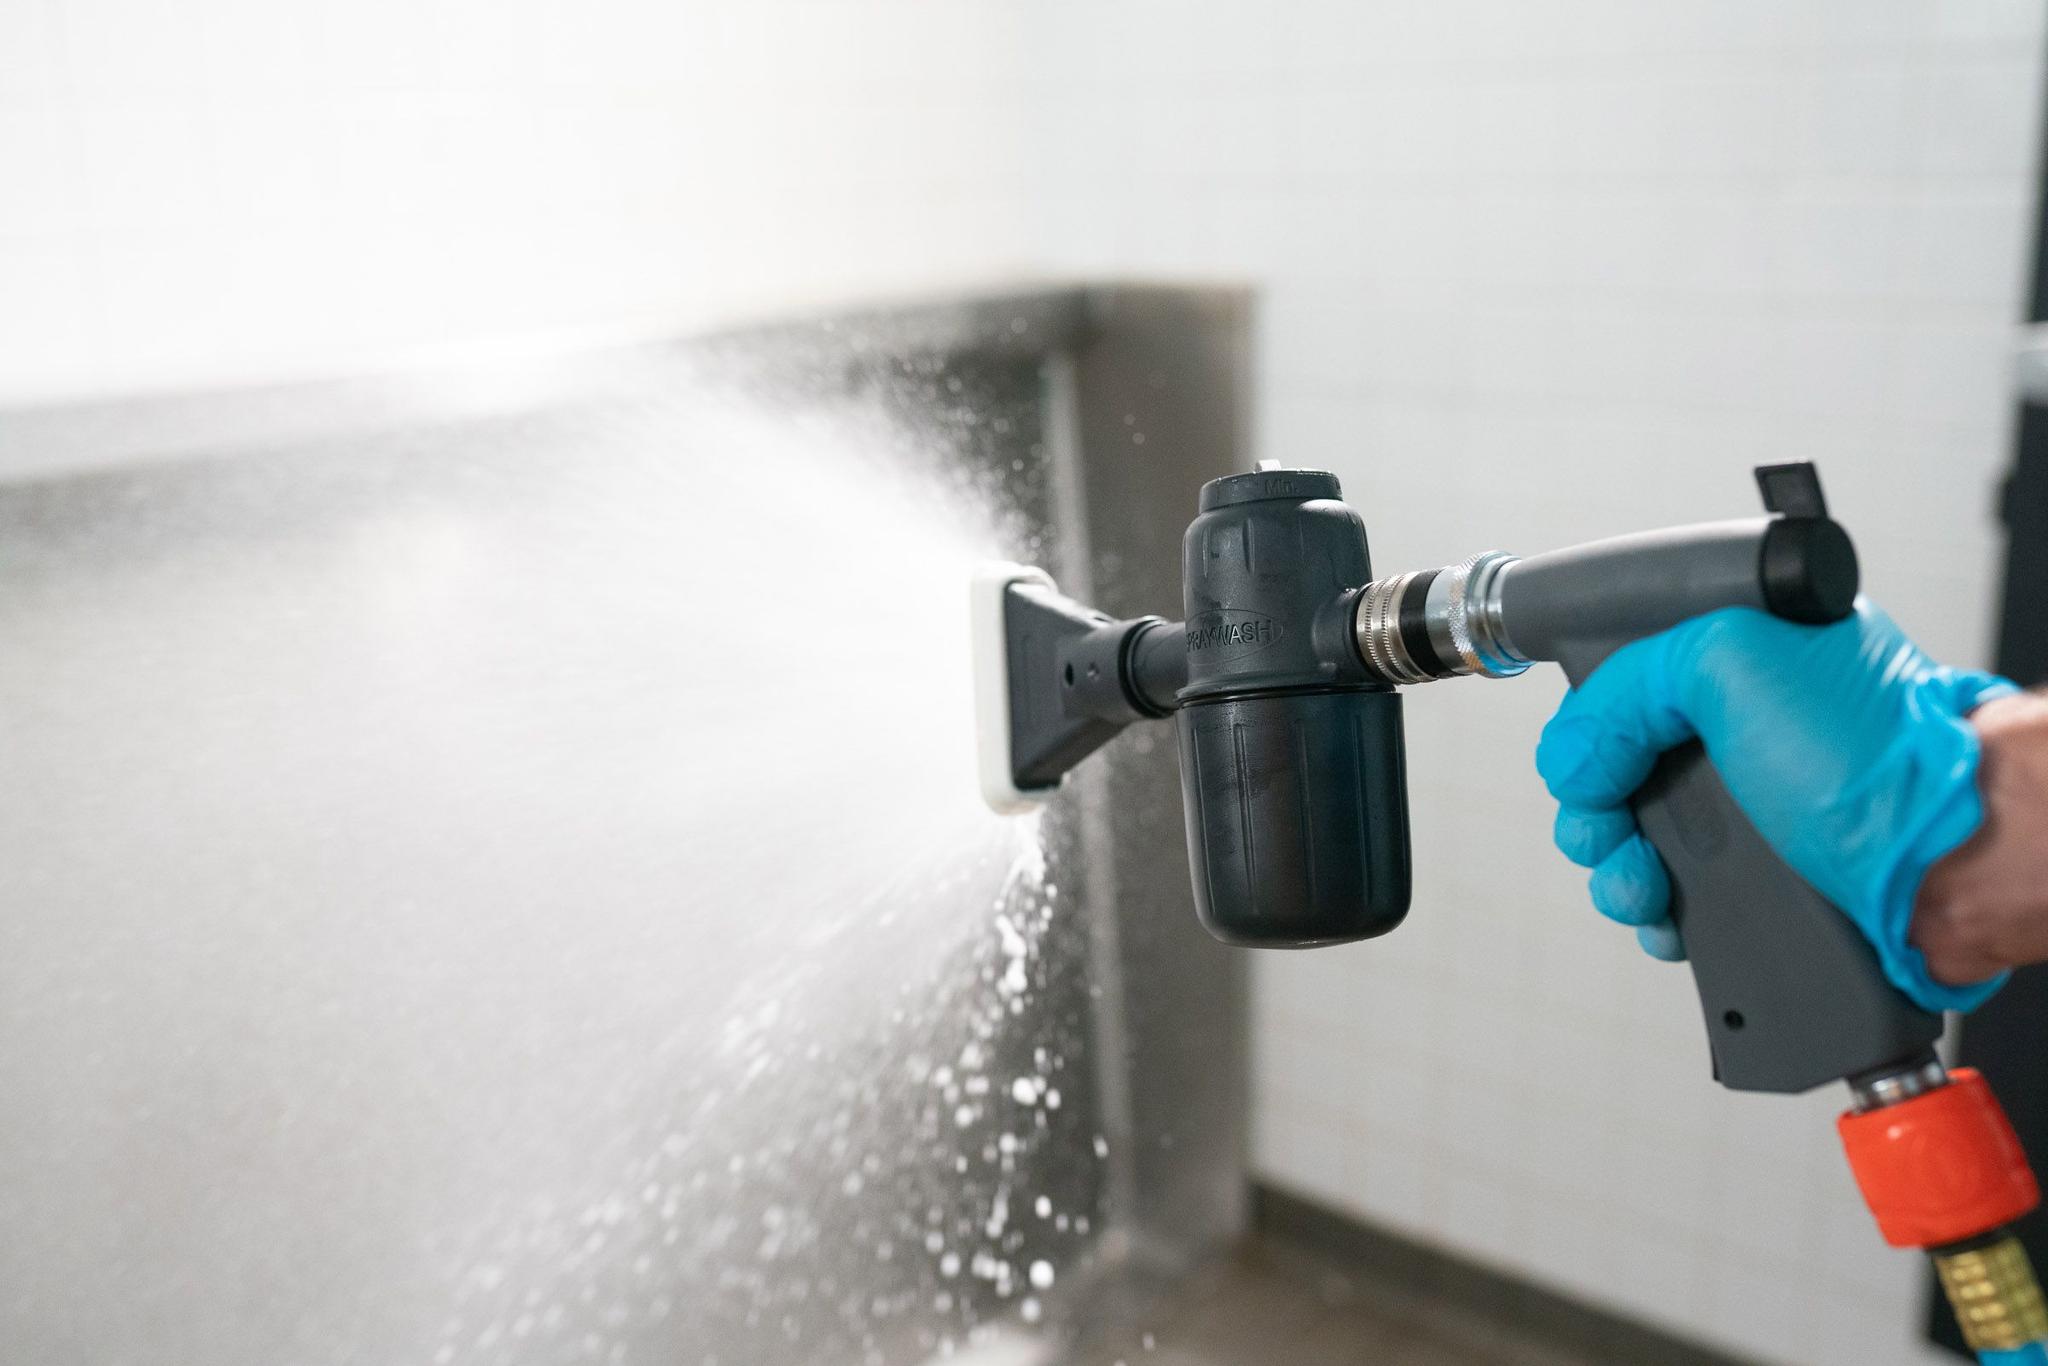 How Does The i-spraywash Cleaning System Compare To A Regular Foaming Gun?